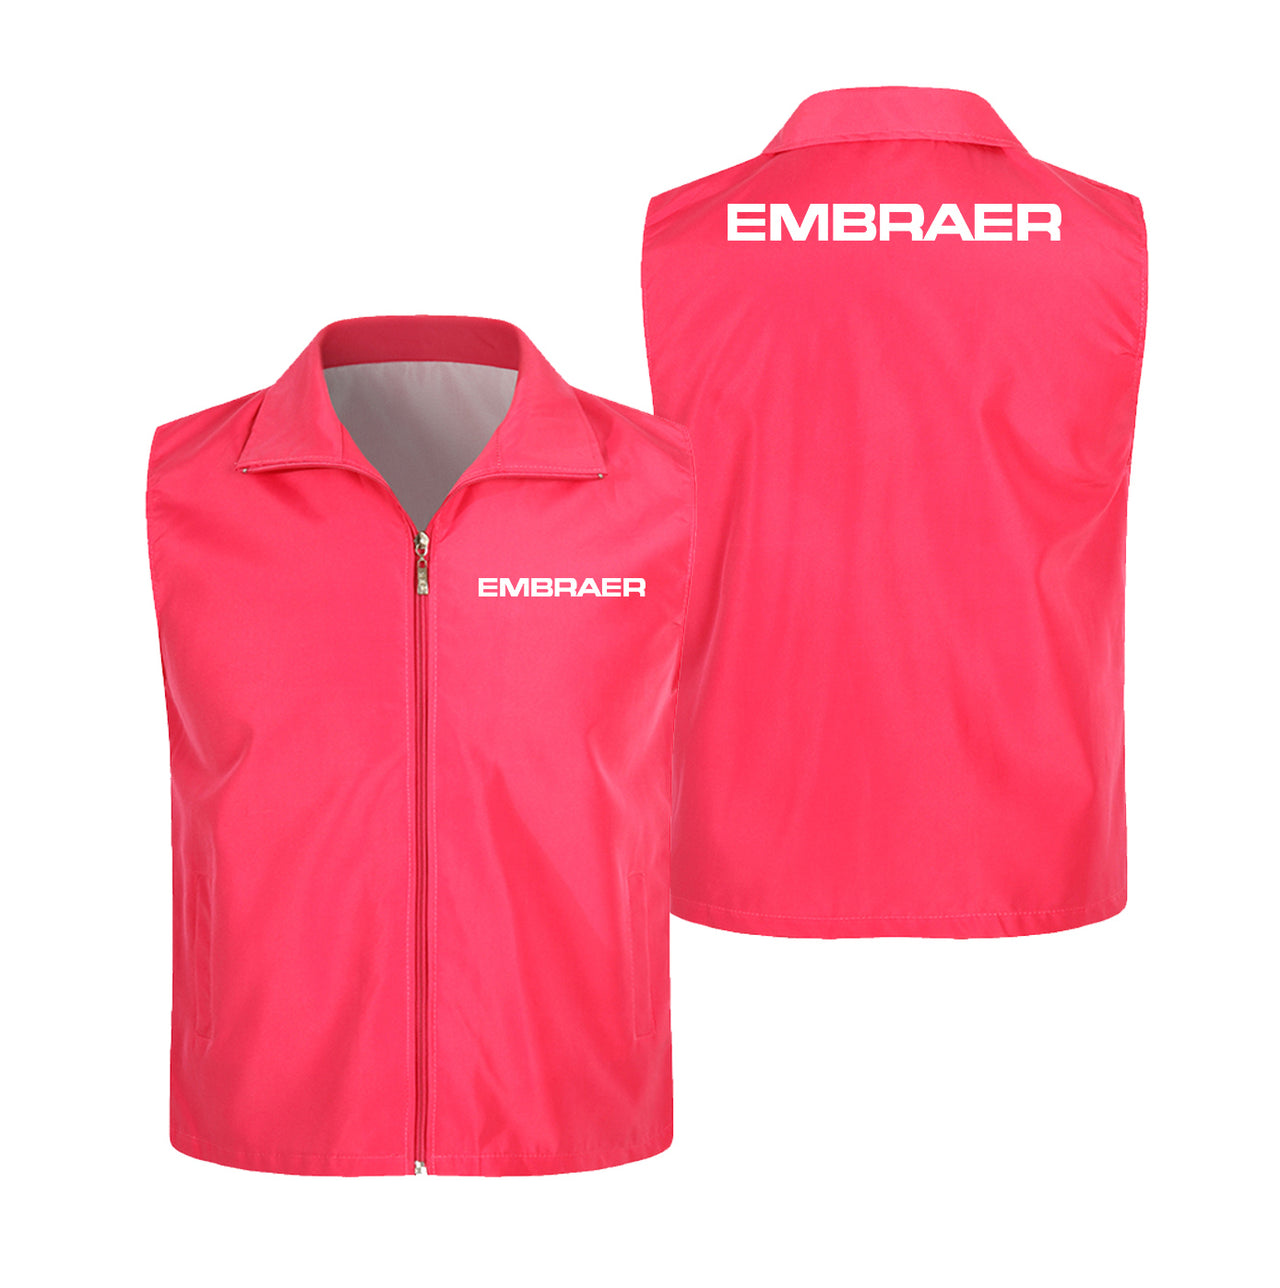 Embraer & Text Designed Thin Style Vests